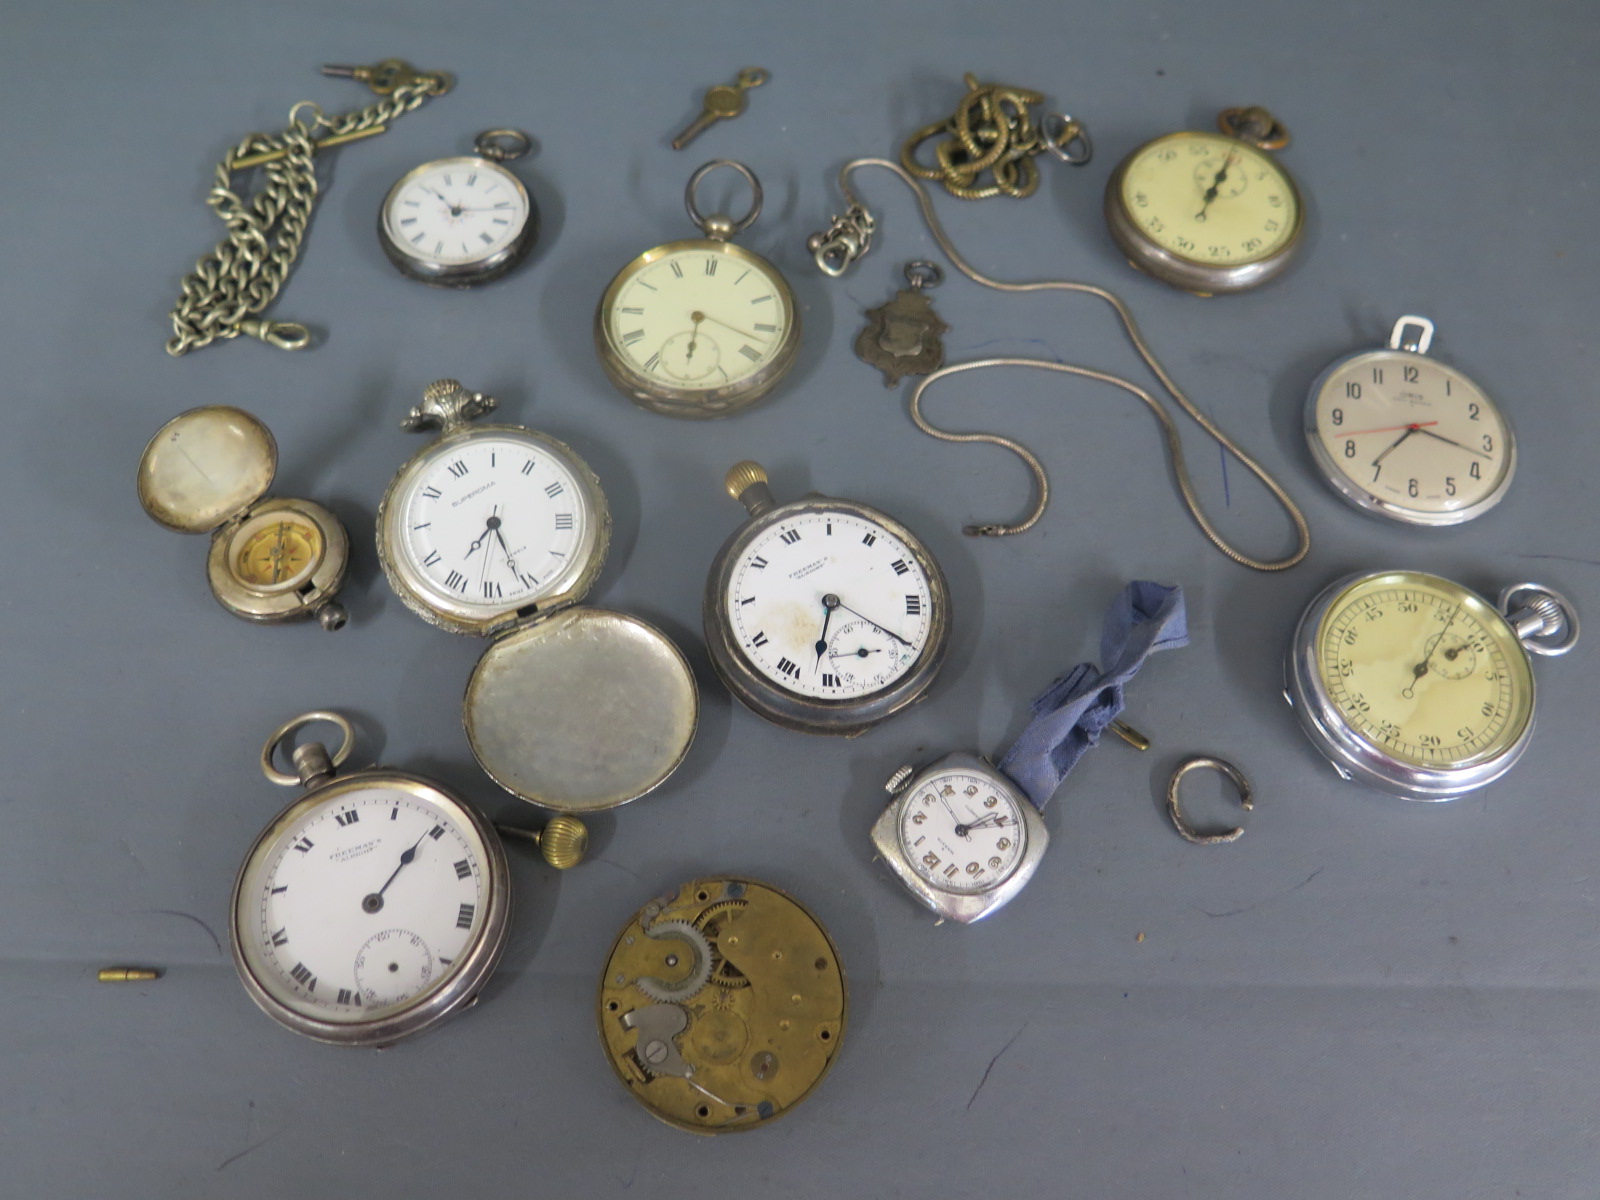 A collection of 9 assorted watches and a compass with chains and keys - all needing attention